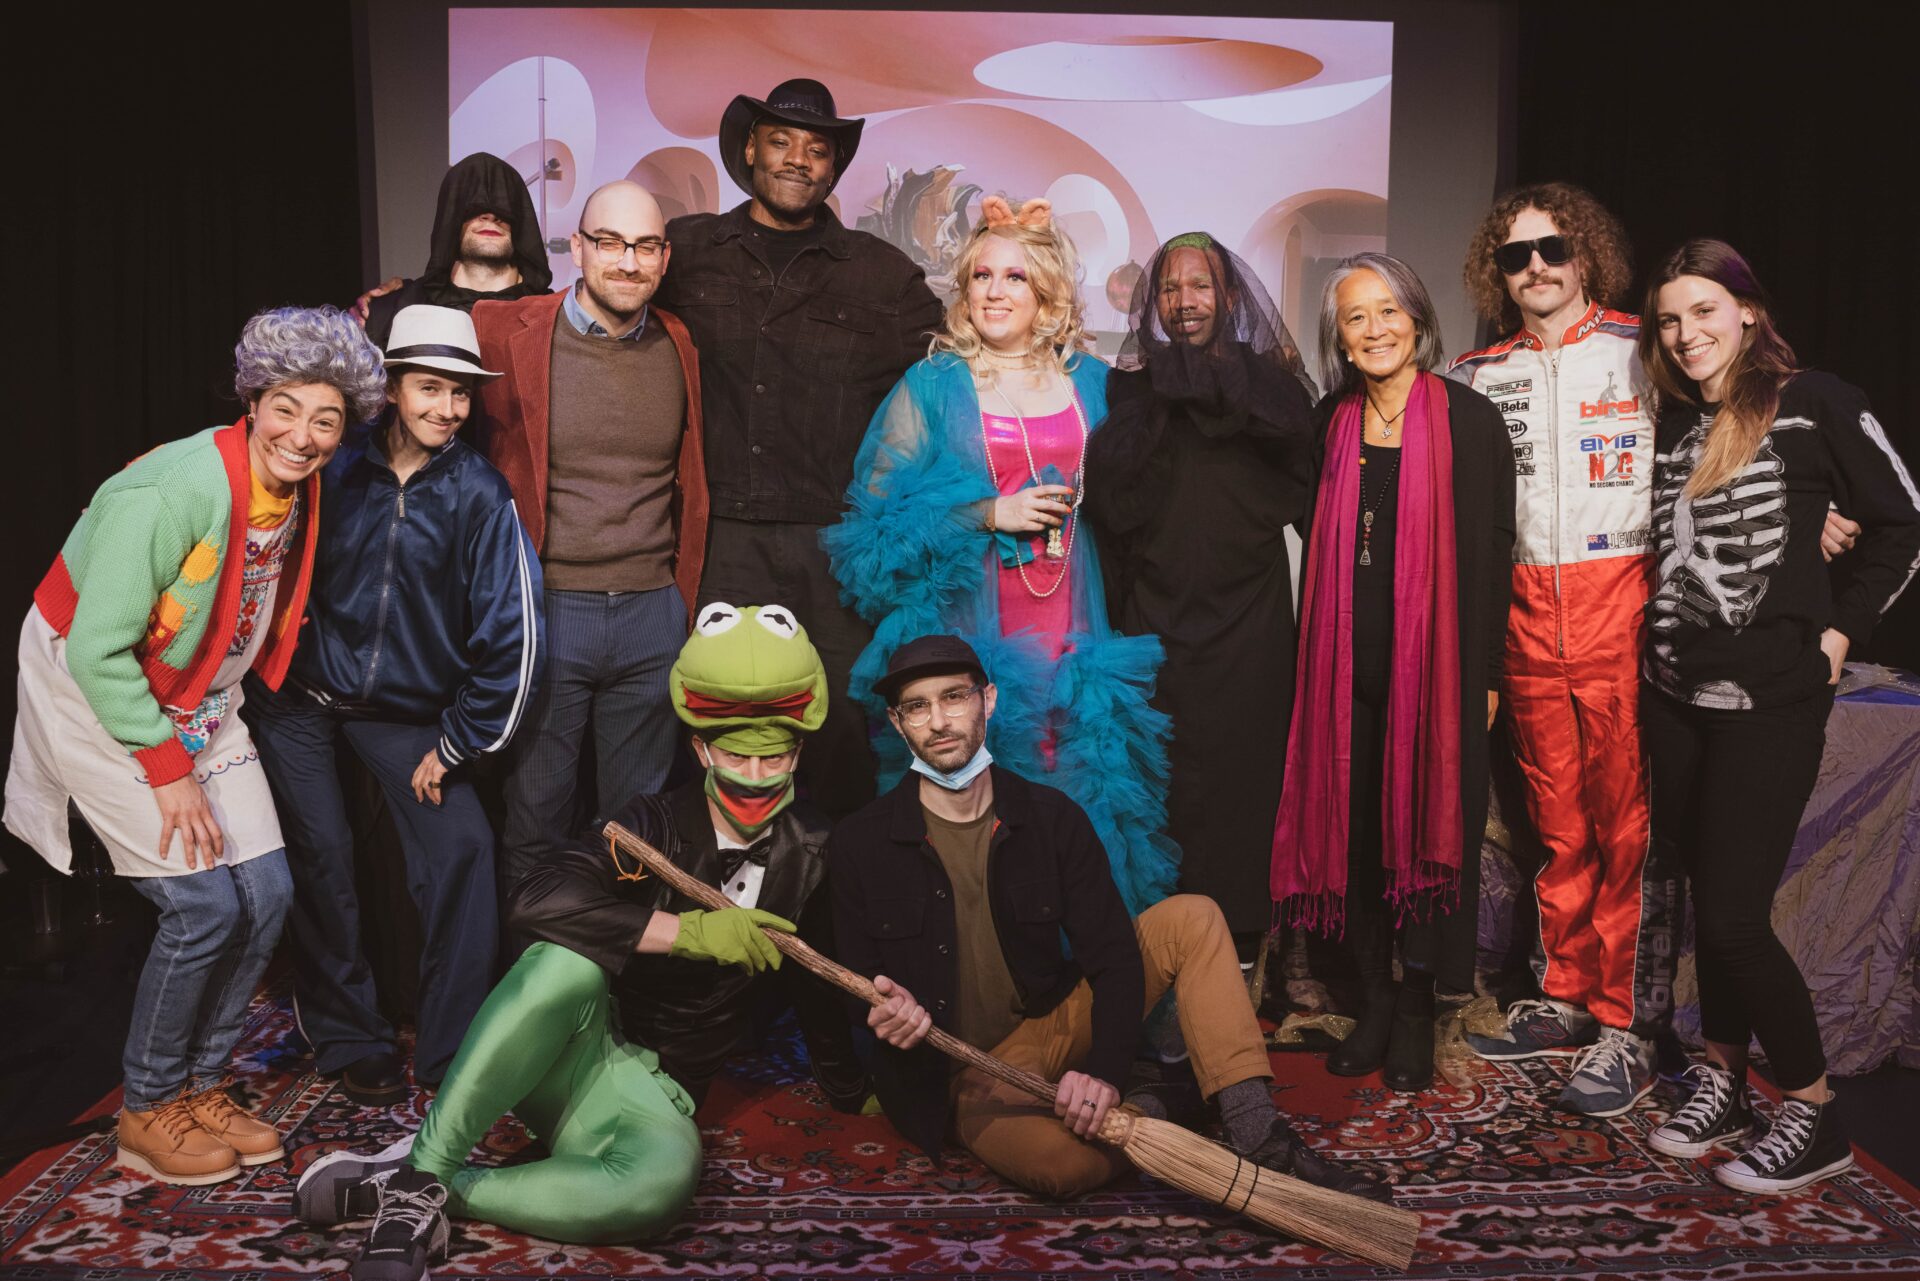 The Muppets play